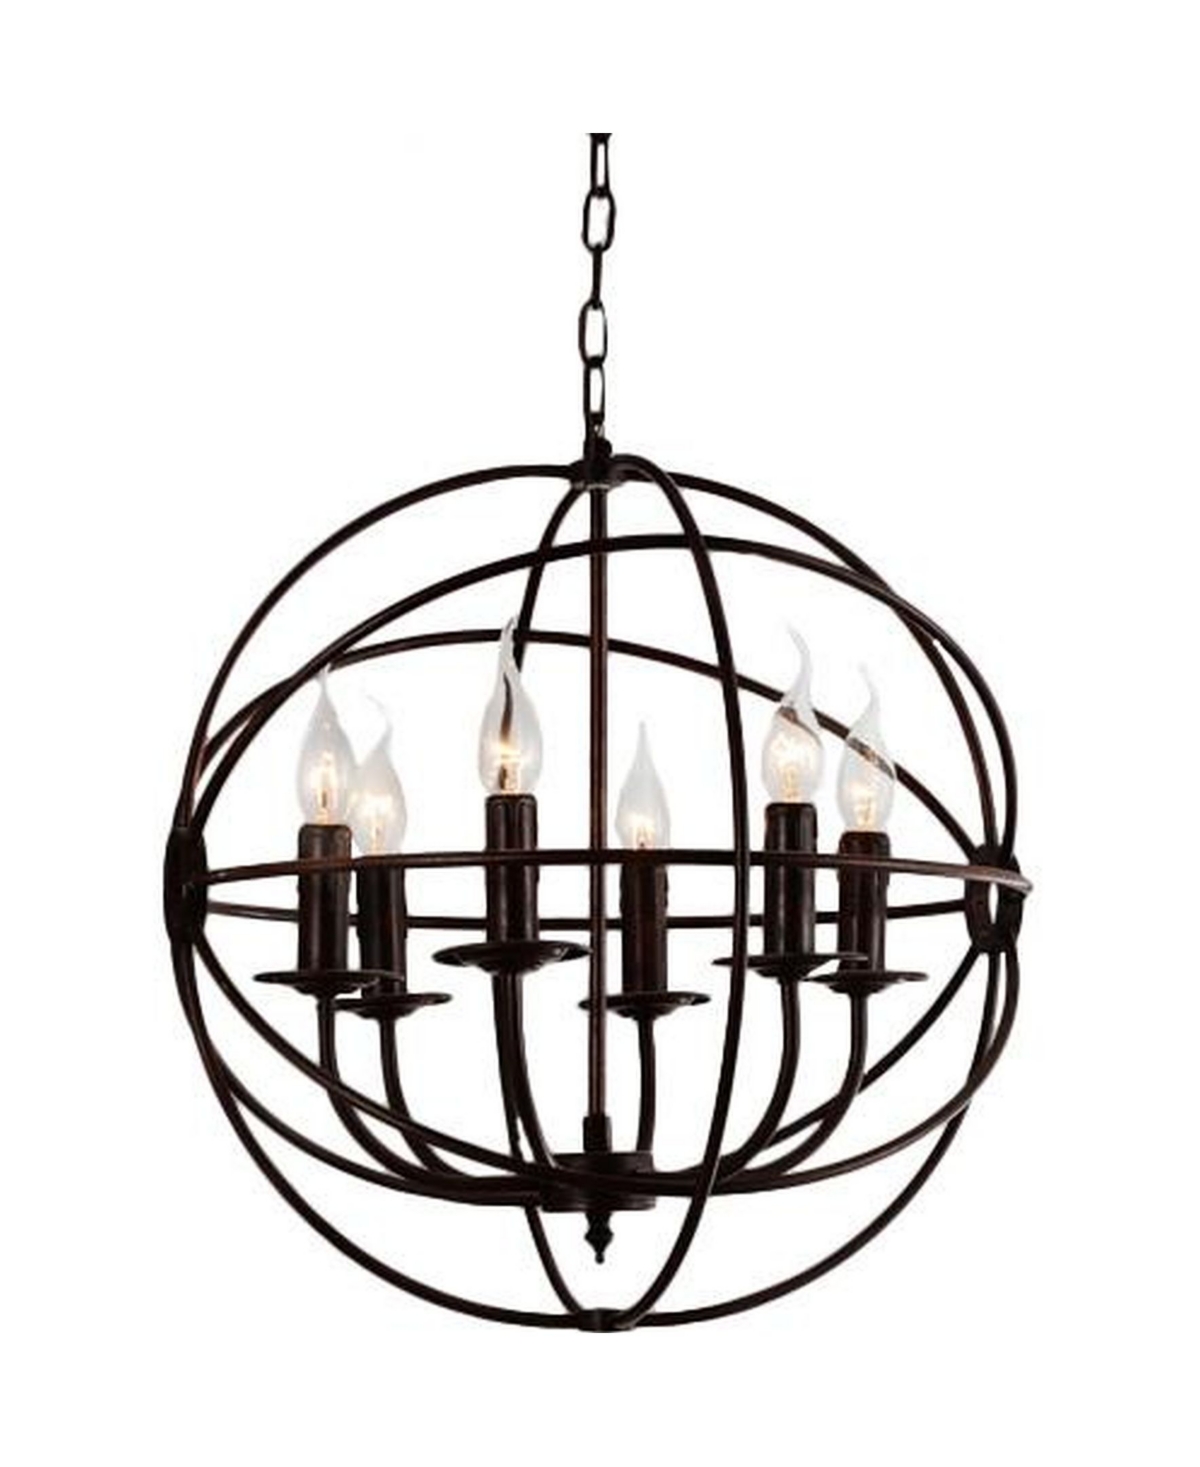 Cwi Lighting Arza 6 Light Chandelier In Brown